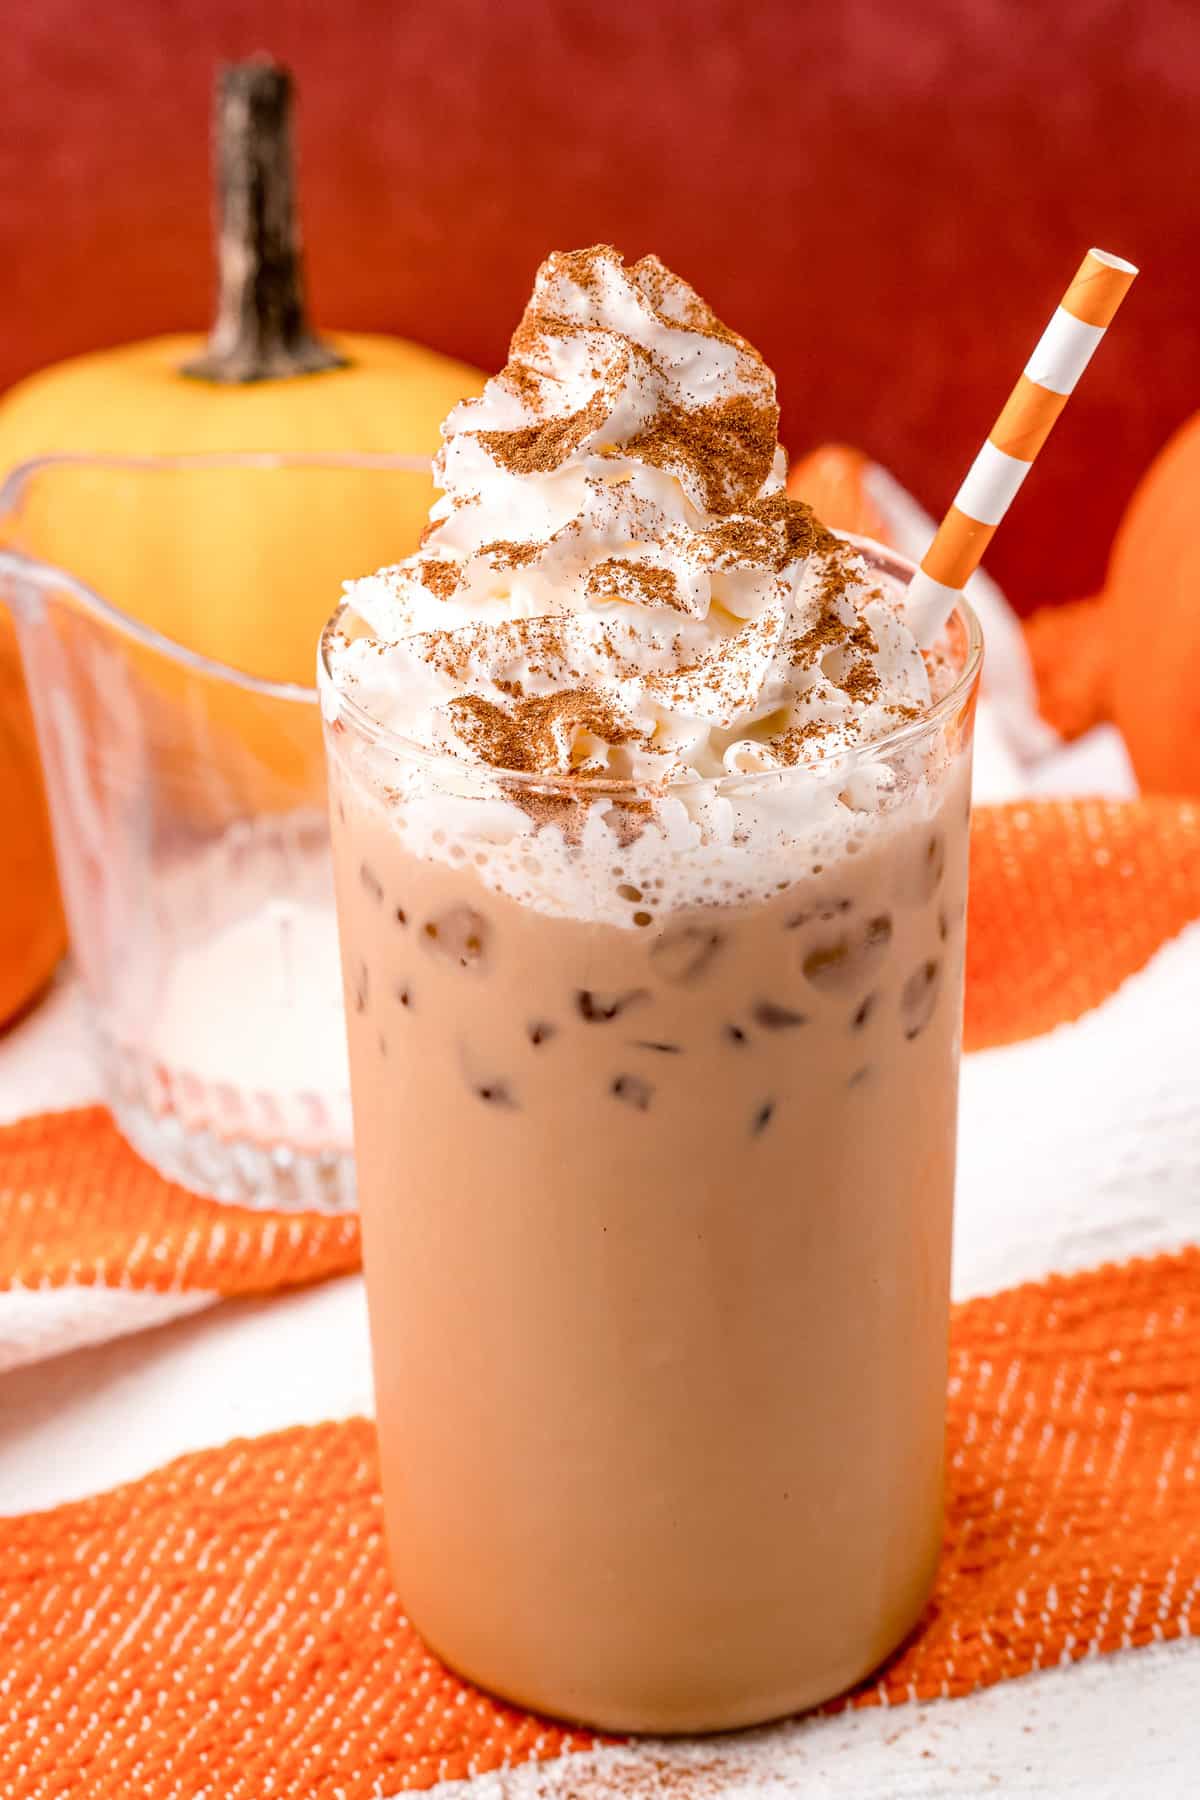 Iced latte on an orange and white background.